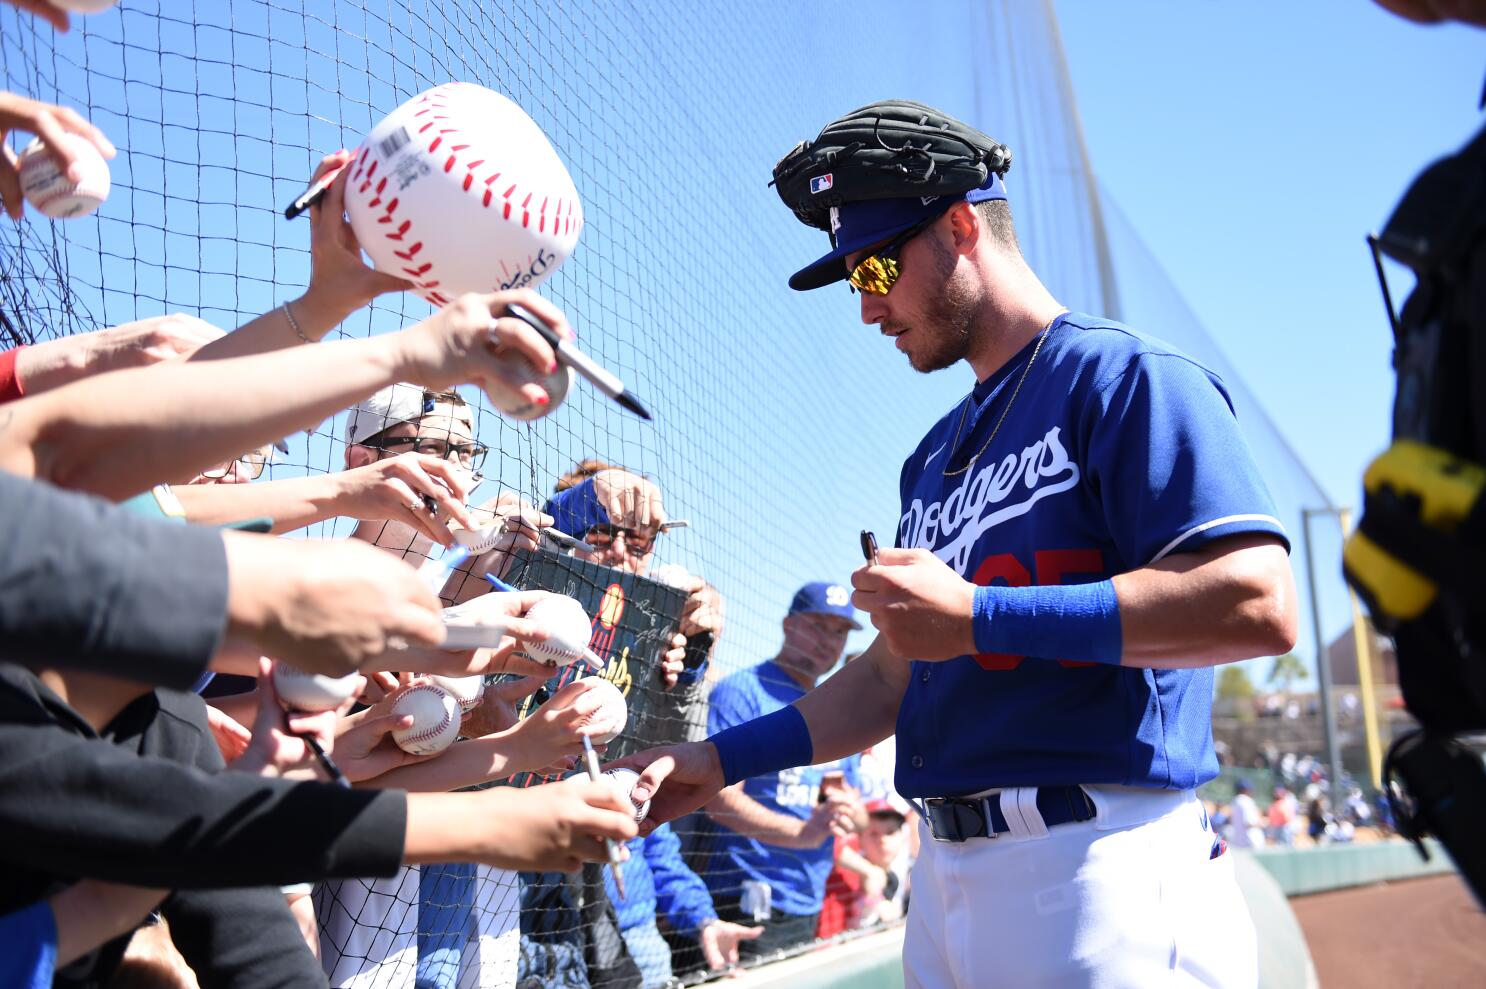 Coronavirus: Why MLB is advising players not to sign autographs